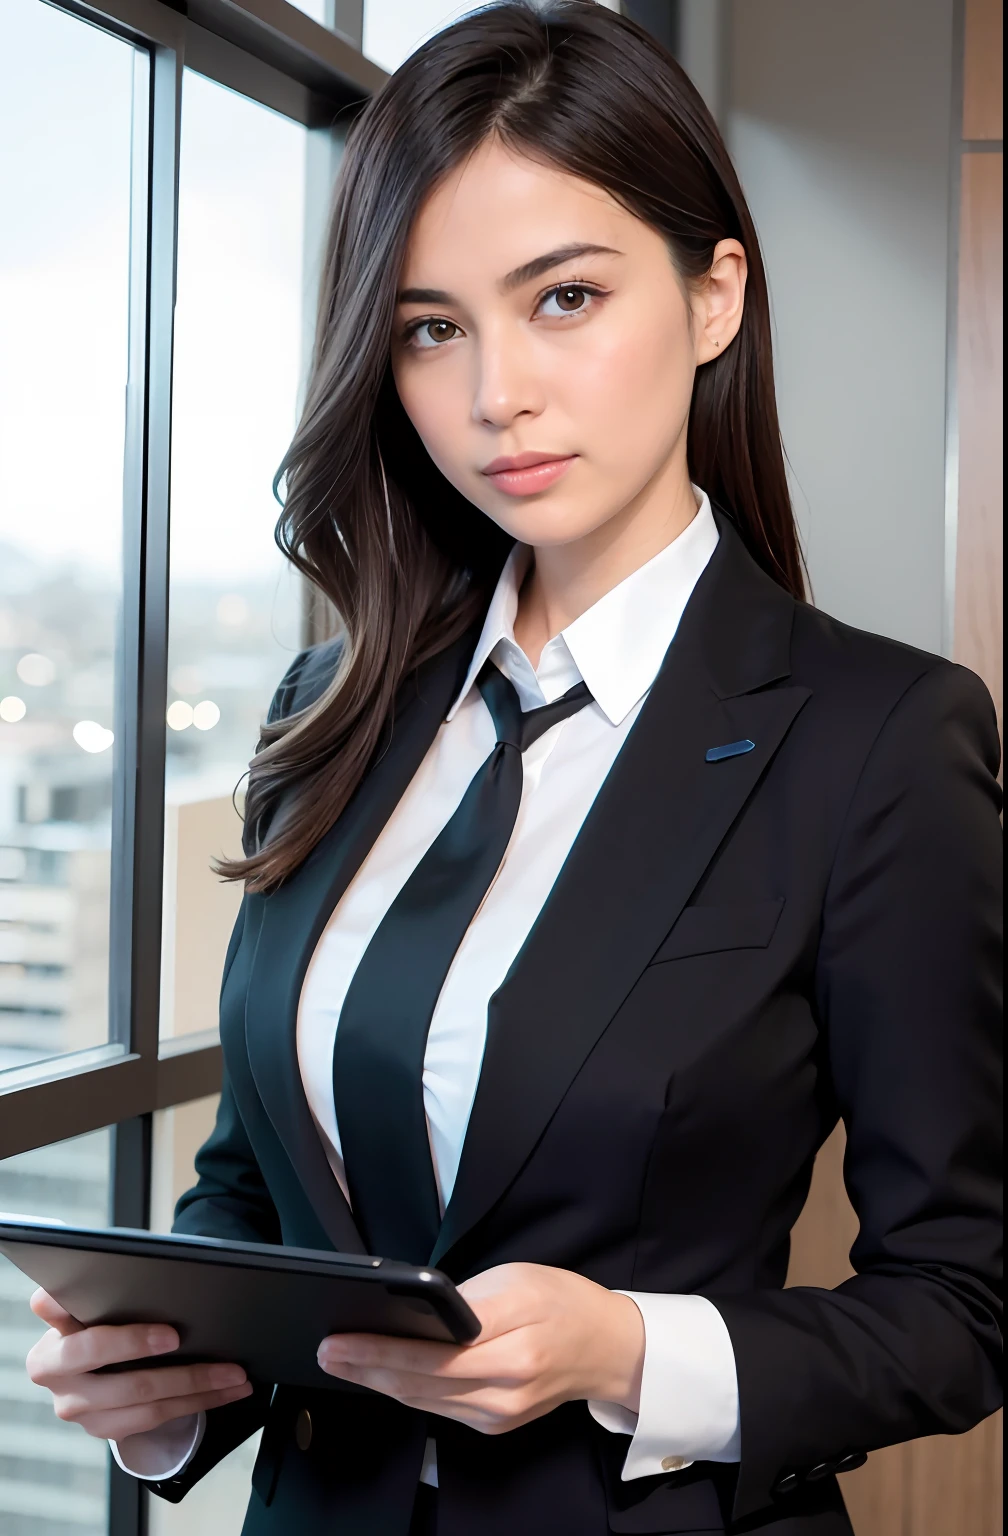 "Imagine Sofia Mendes, the lawyer specializing in Digital Criminal Law, in action! She is depicted in a modern and technologically advanced office, with an elegant glass table and a glass wall with a stunning view of the city in the background. His posture is confident and professional, with a determined expression on his face.

Sofia wears an elegant navy blue suit, conveying authority and professionalism. Your brown hair, perfectly coiffed, reflect the subtle glow of office lights. in her hands, she holds a tablet, symbolizing your connection to the digital world.